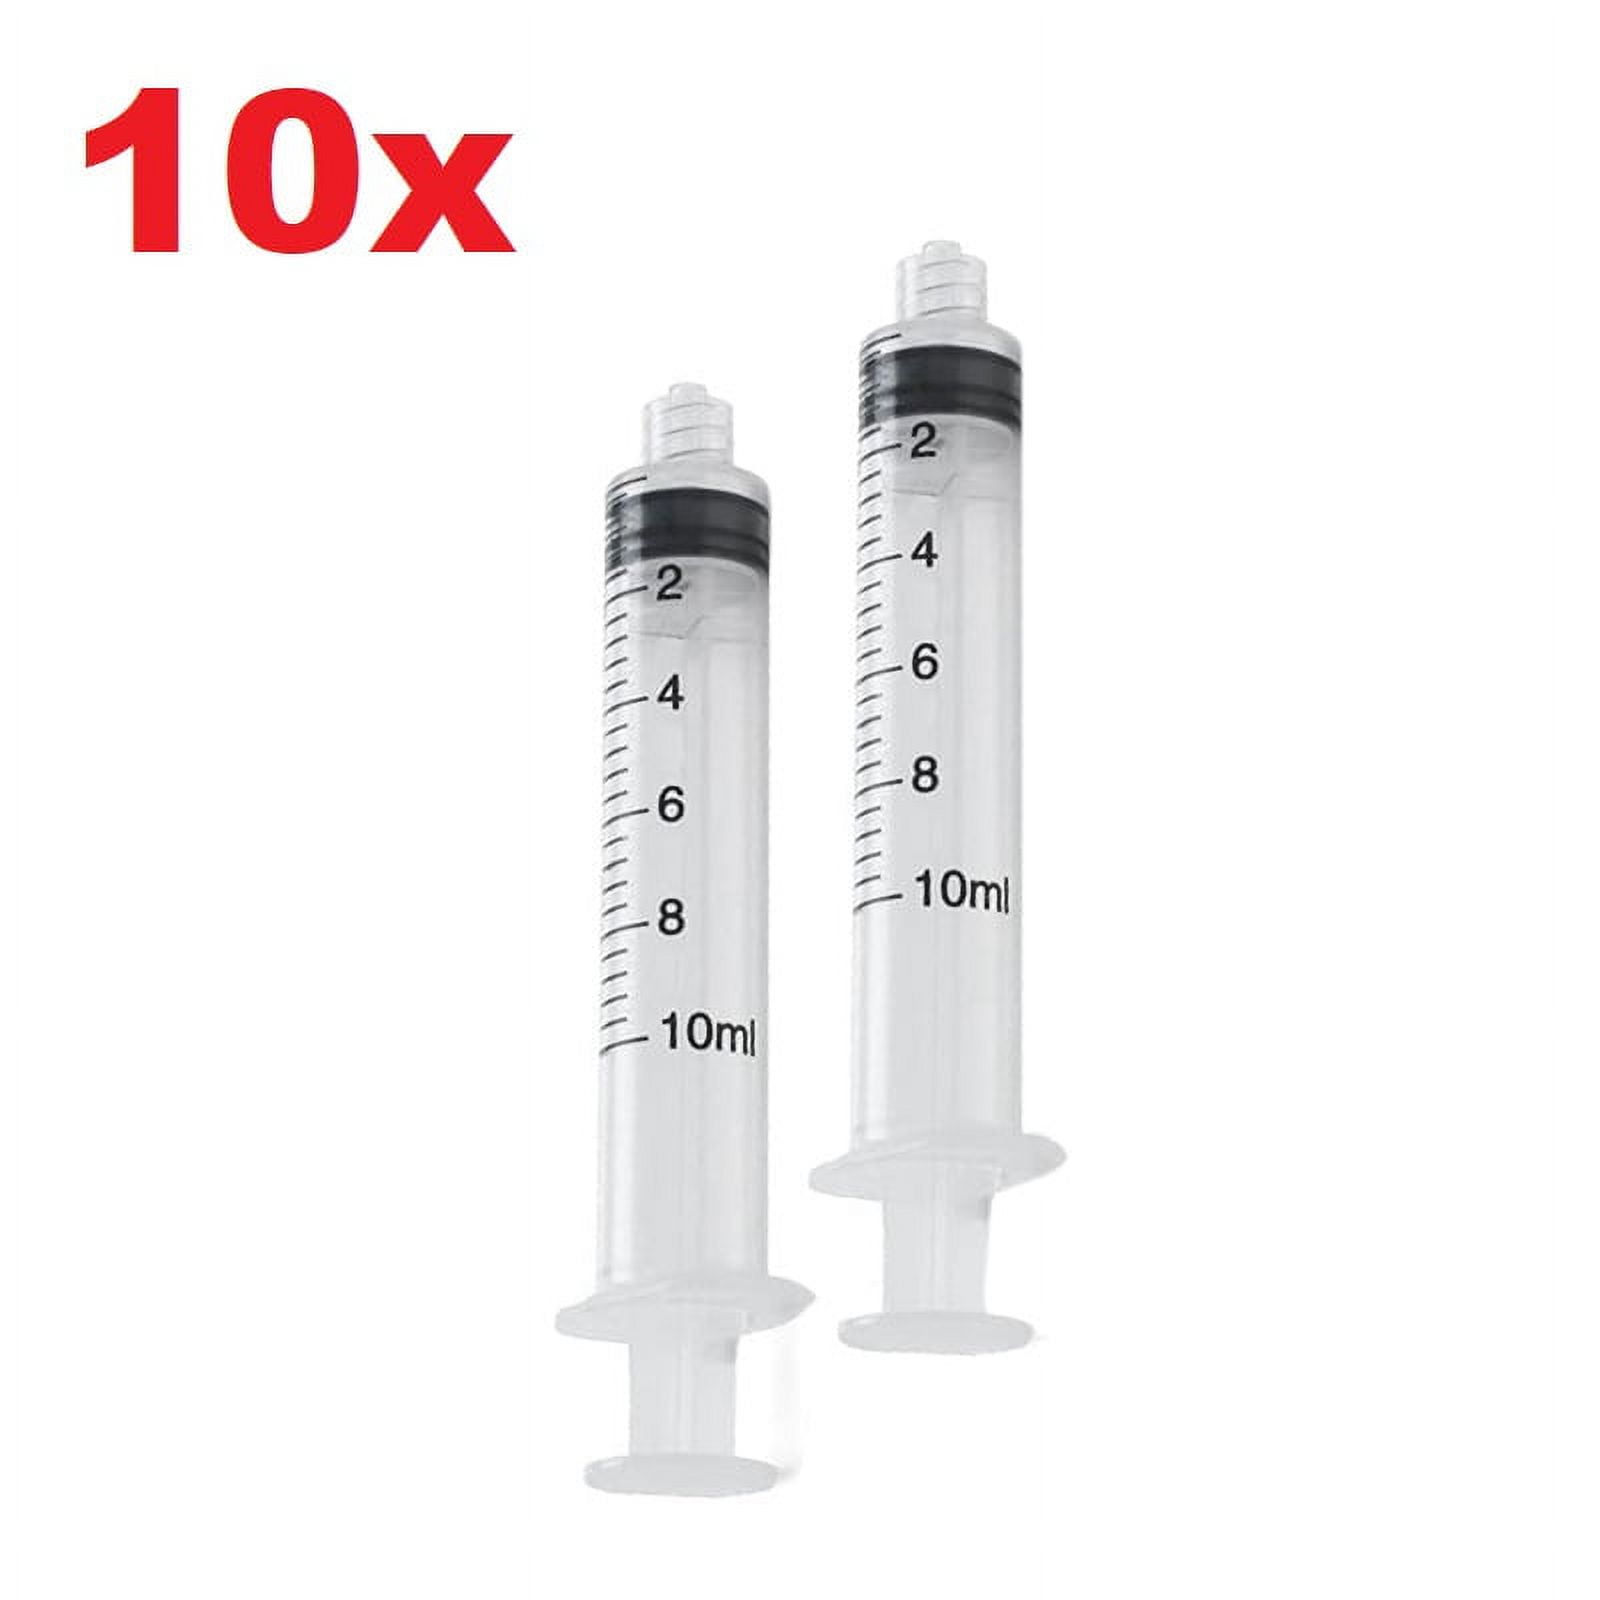 2.5ml Syringe with 25 Gauge 1 inch Needle - 25G 1 inch Needle and Syringe  for Scientific Labs, Liquids Refilling, Dispensing